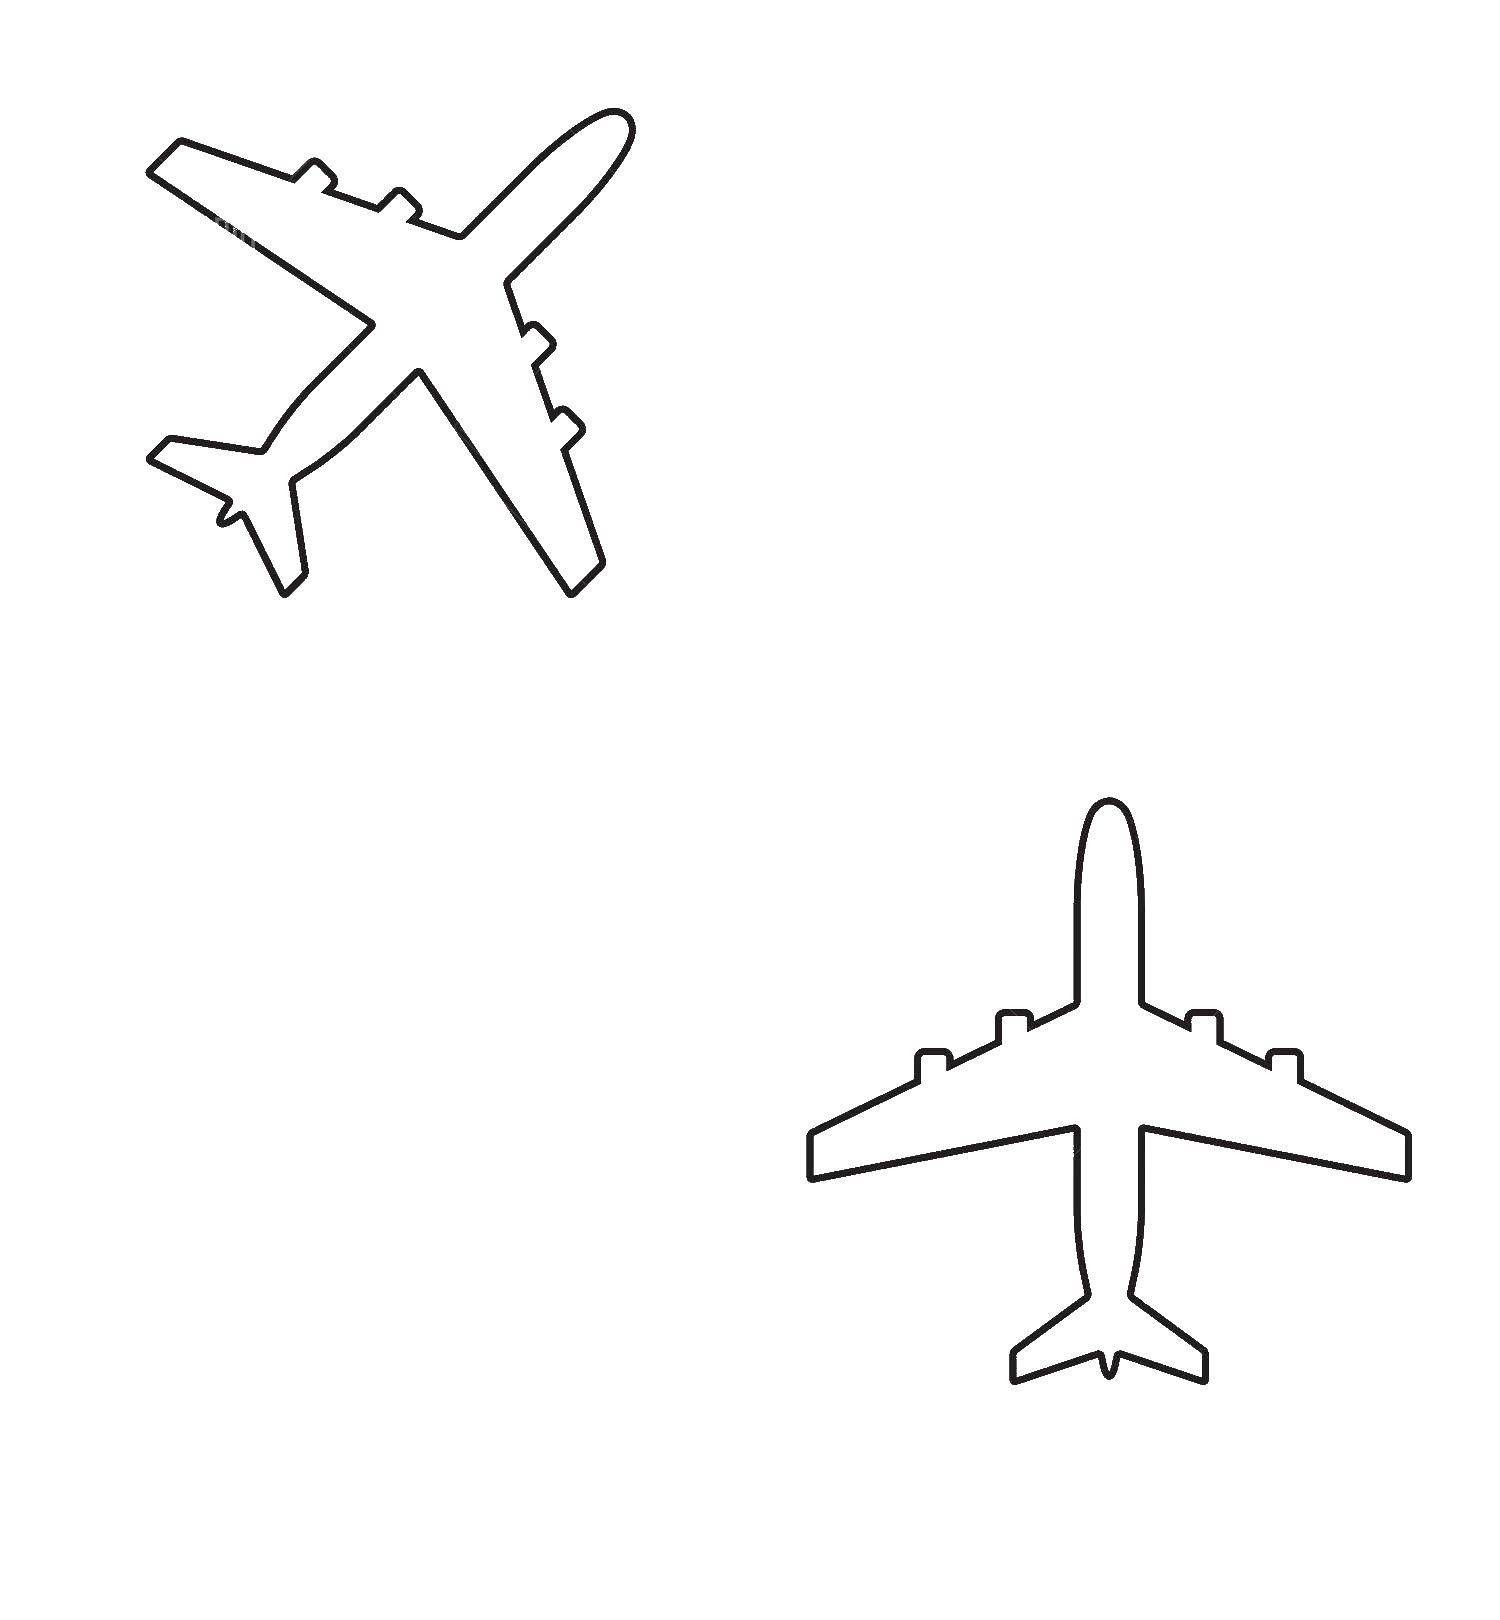 Coloring Two aircraft. Category The contour of the aircraft. Tags:  two of the aircraft.